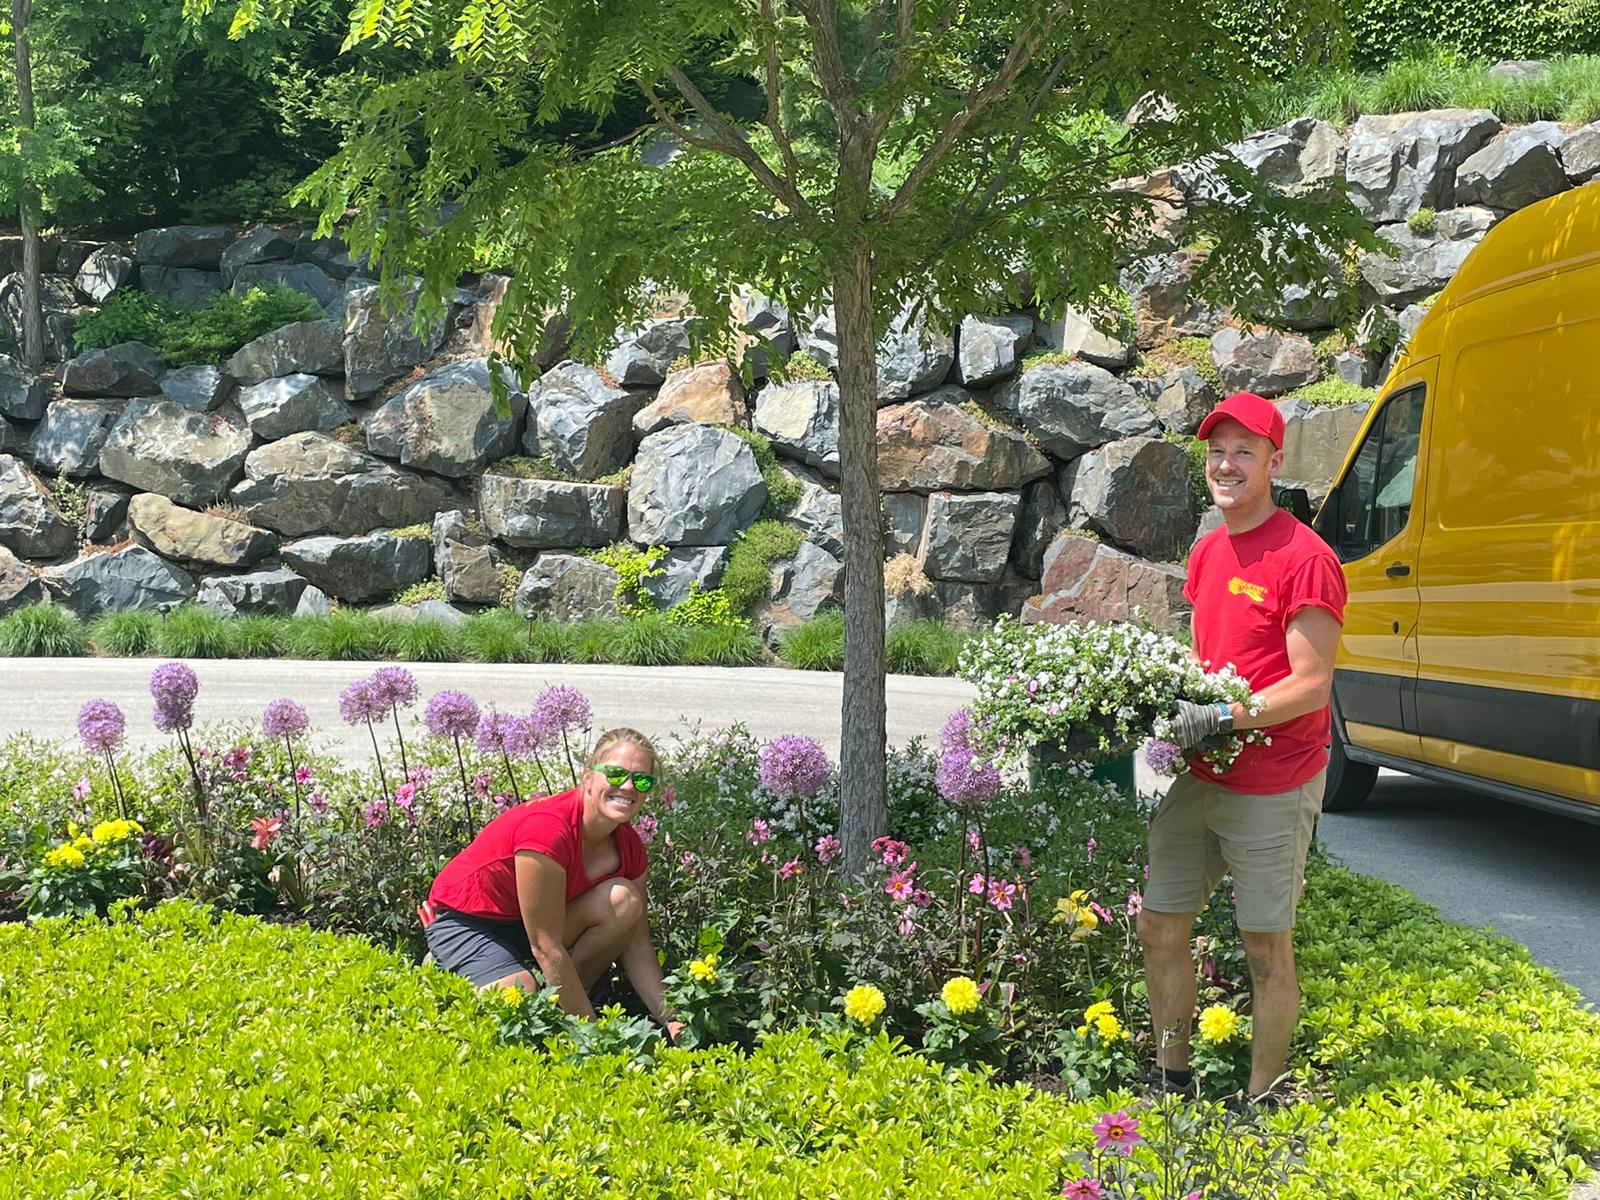 Two people in red shirts are gardening by a colorful flowerbed with a yellow van and a rocky backdrop under a sunny sky.